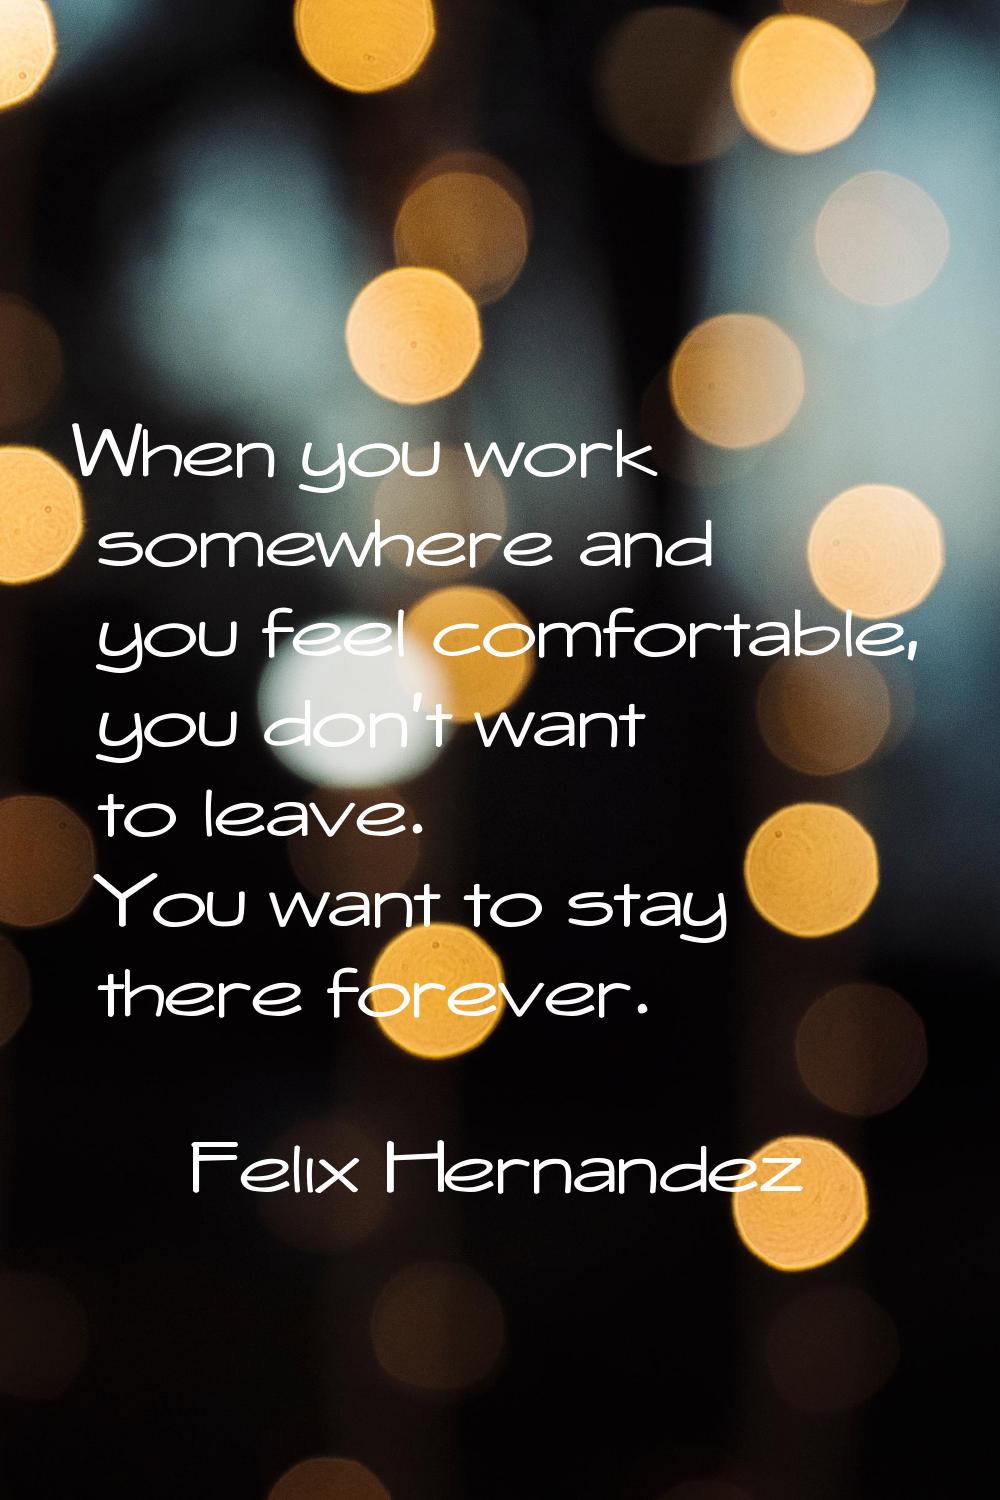 When you work somewhere and you feel comfortable, you don't want to leave. You want to stay there f